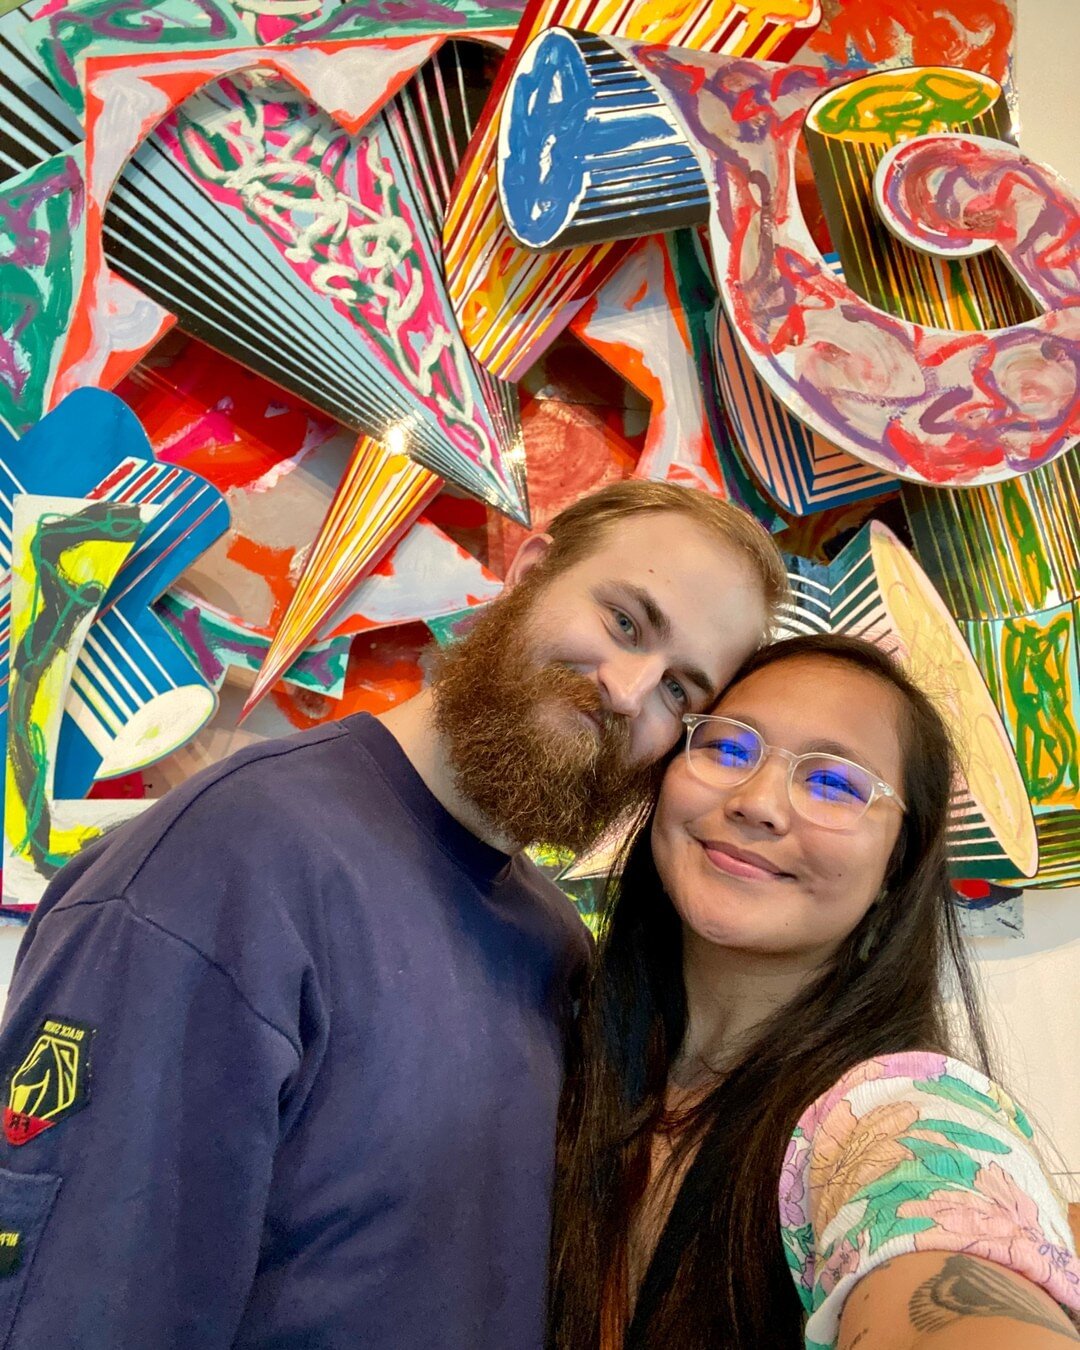 back to work today from my hubby &amp; I's wedding anniversary getaway in Ohio 🎉🥳 enjoy this selfie we took at the @columbusmuseum⠀⠀⠀⠀⠀⠀⠀⠀⠀
⠀⠀⠀⠀⠀⠀⠀⠀⠀
I will be reaching out to all of those who DM'ed &amp; commented on my post last Wednesday in sear